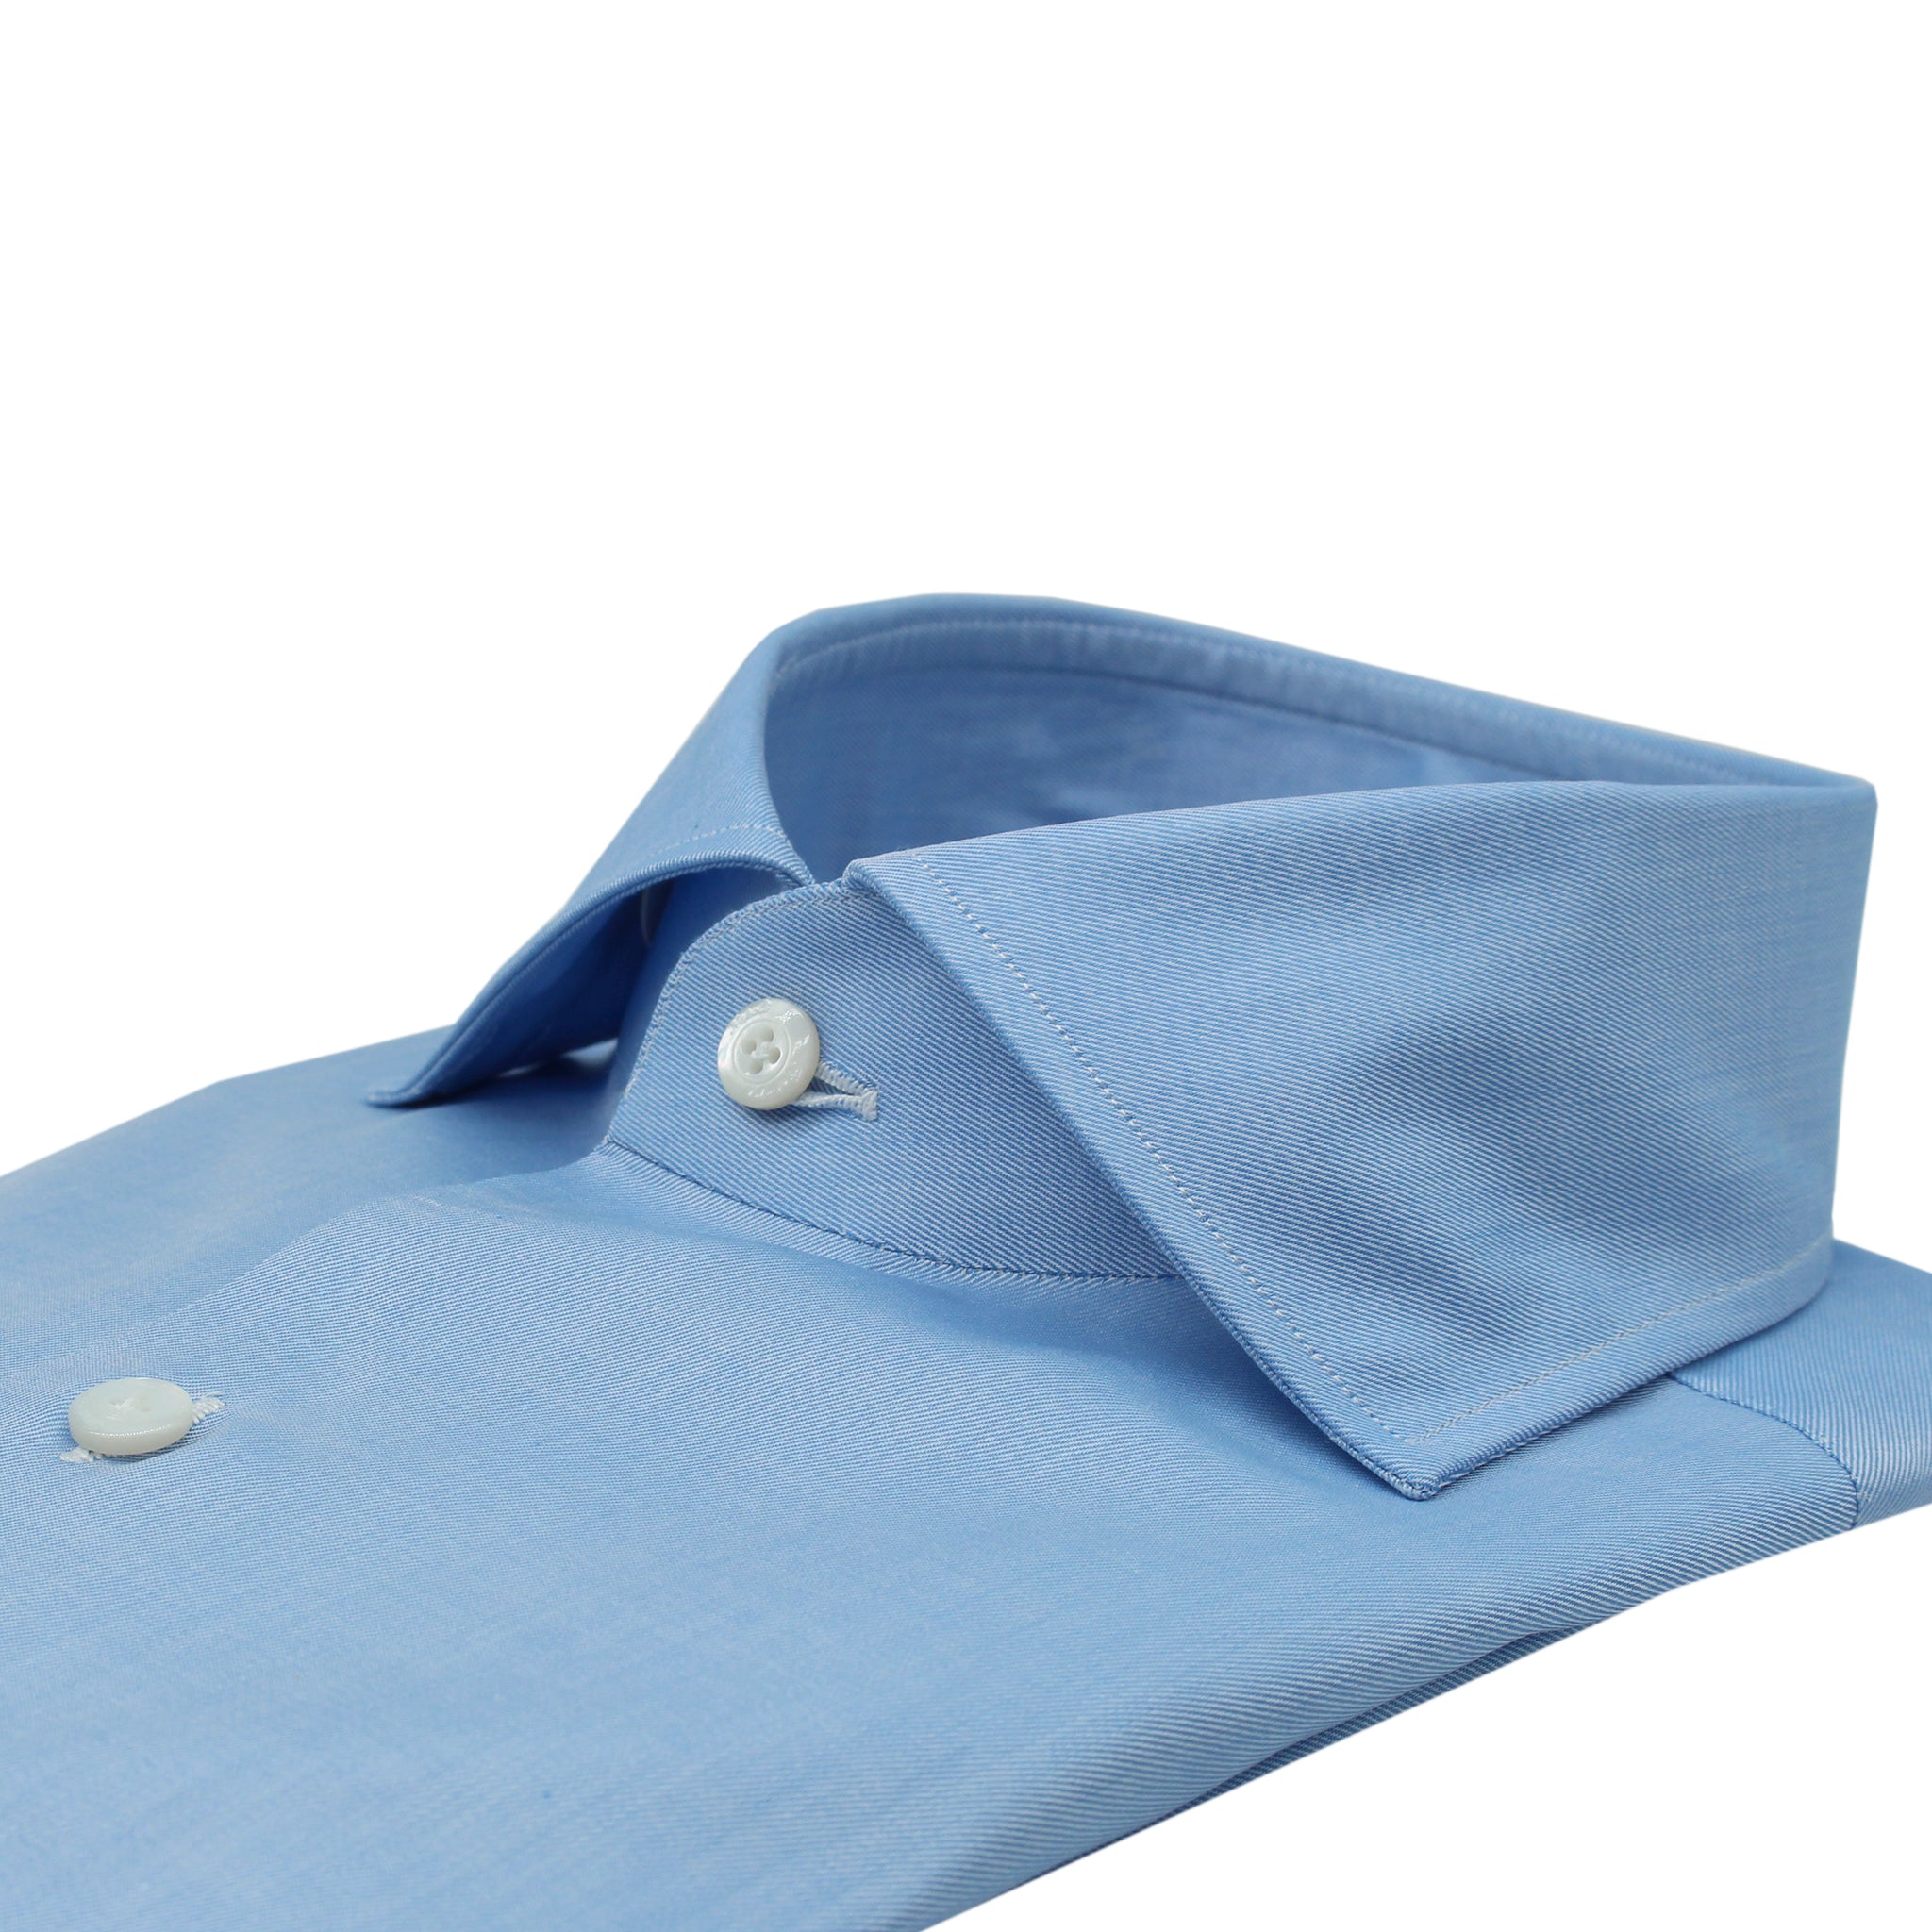 Classic fit Naples shirt in pink cotton twill